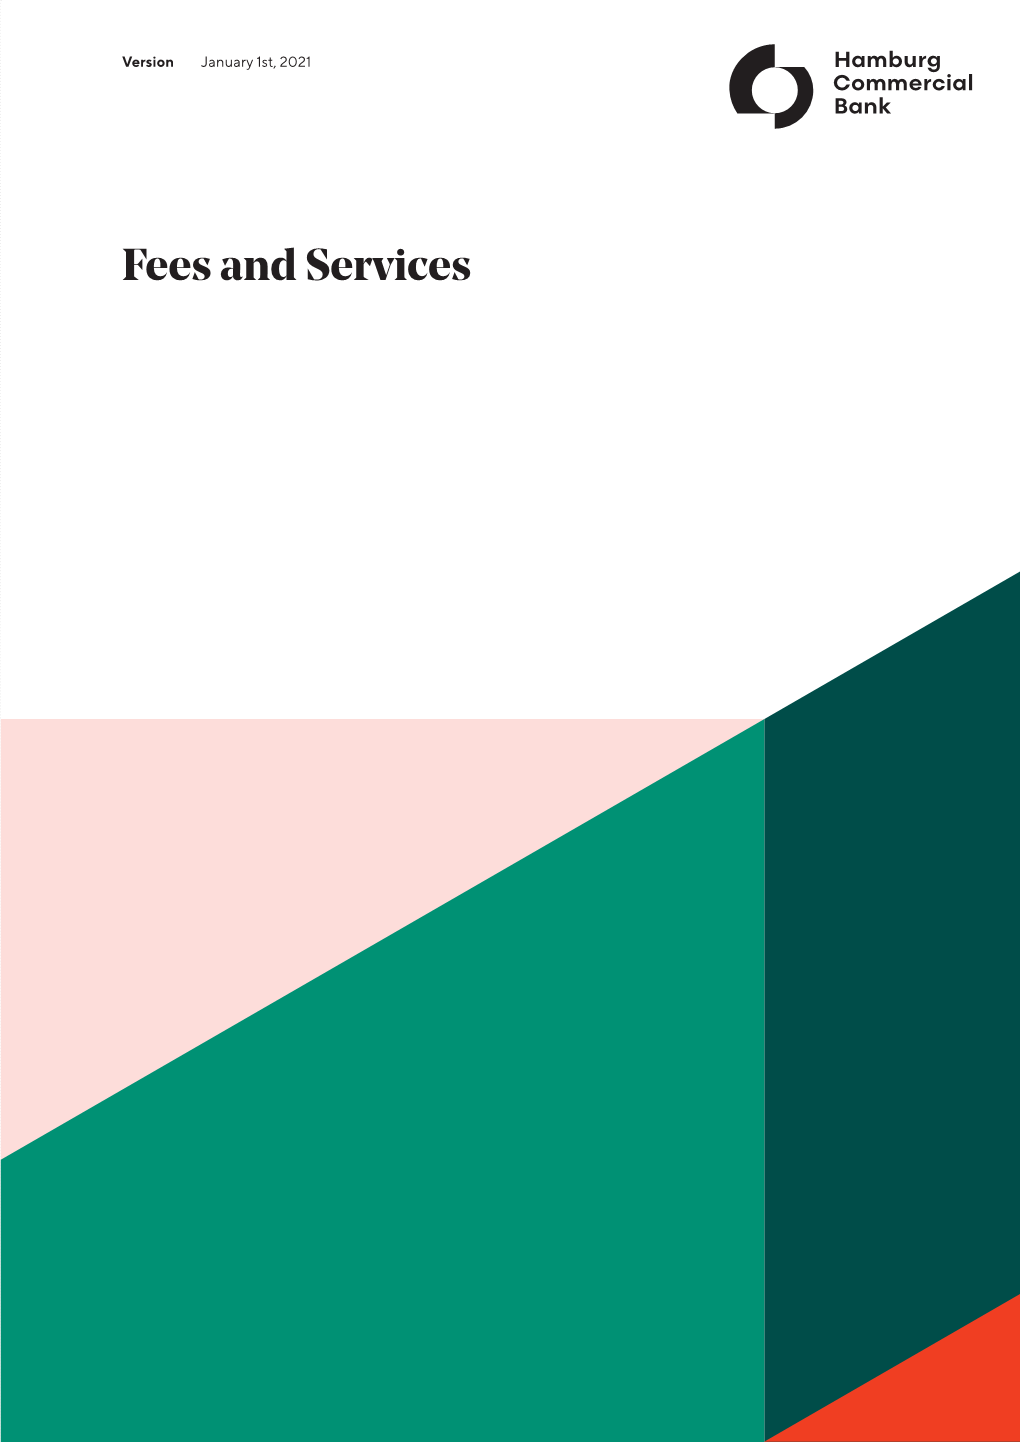 Fees and Services Fees and Services VERSION: January 1St, 2021